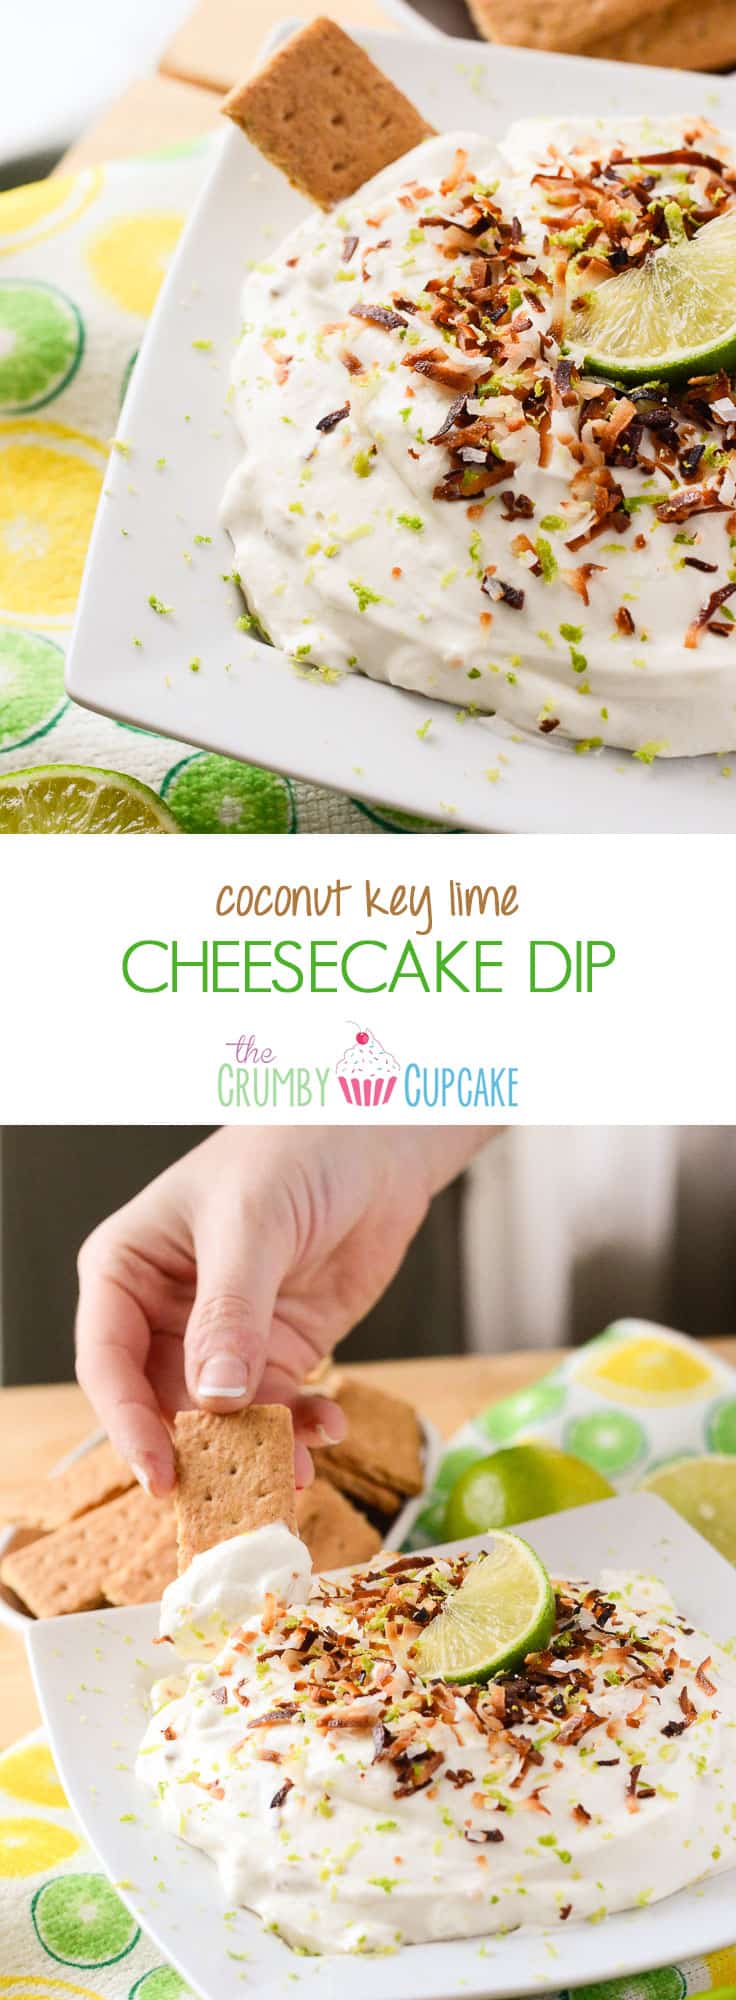 Coconut Key Lime Cheesecake Dip | A fluffy, refreshing, and versatile desert hybrid - key lime cheesecake dip combined with freshly toasted coconut is perfect for graham cracker dunkin'!